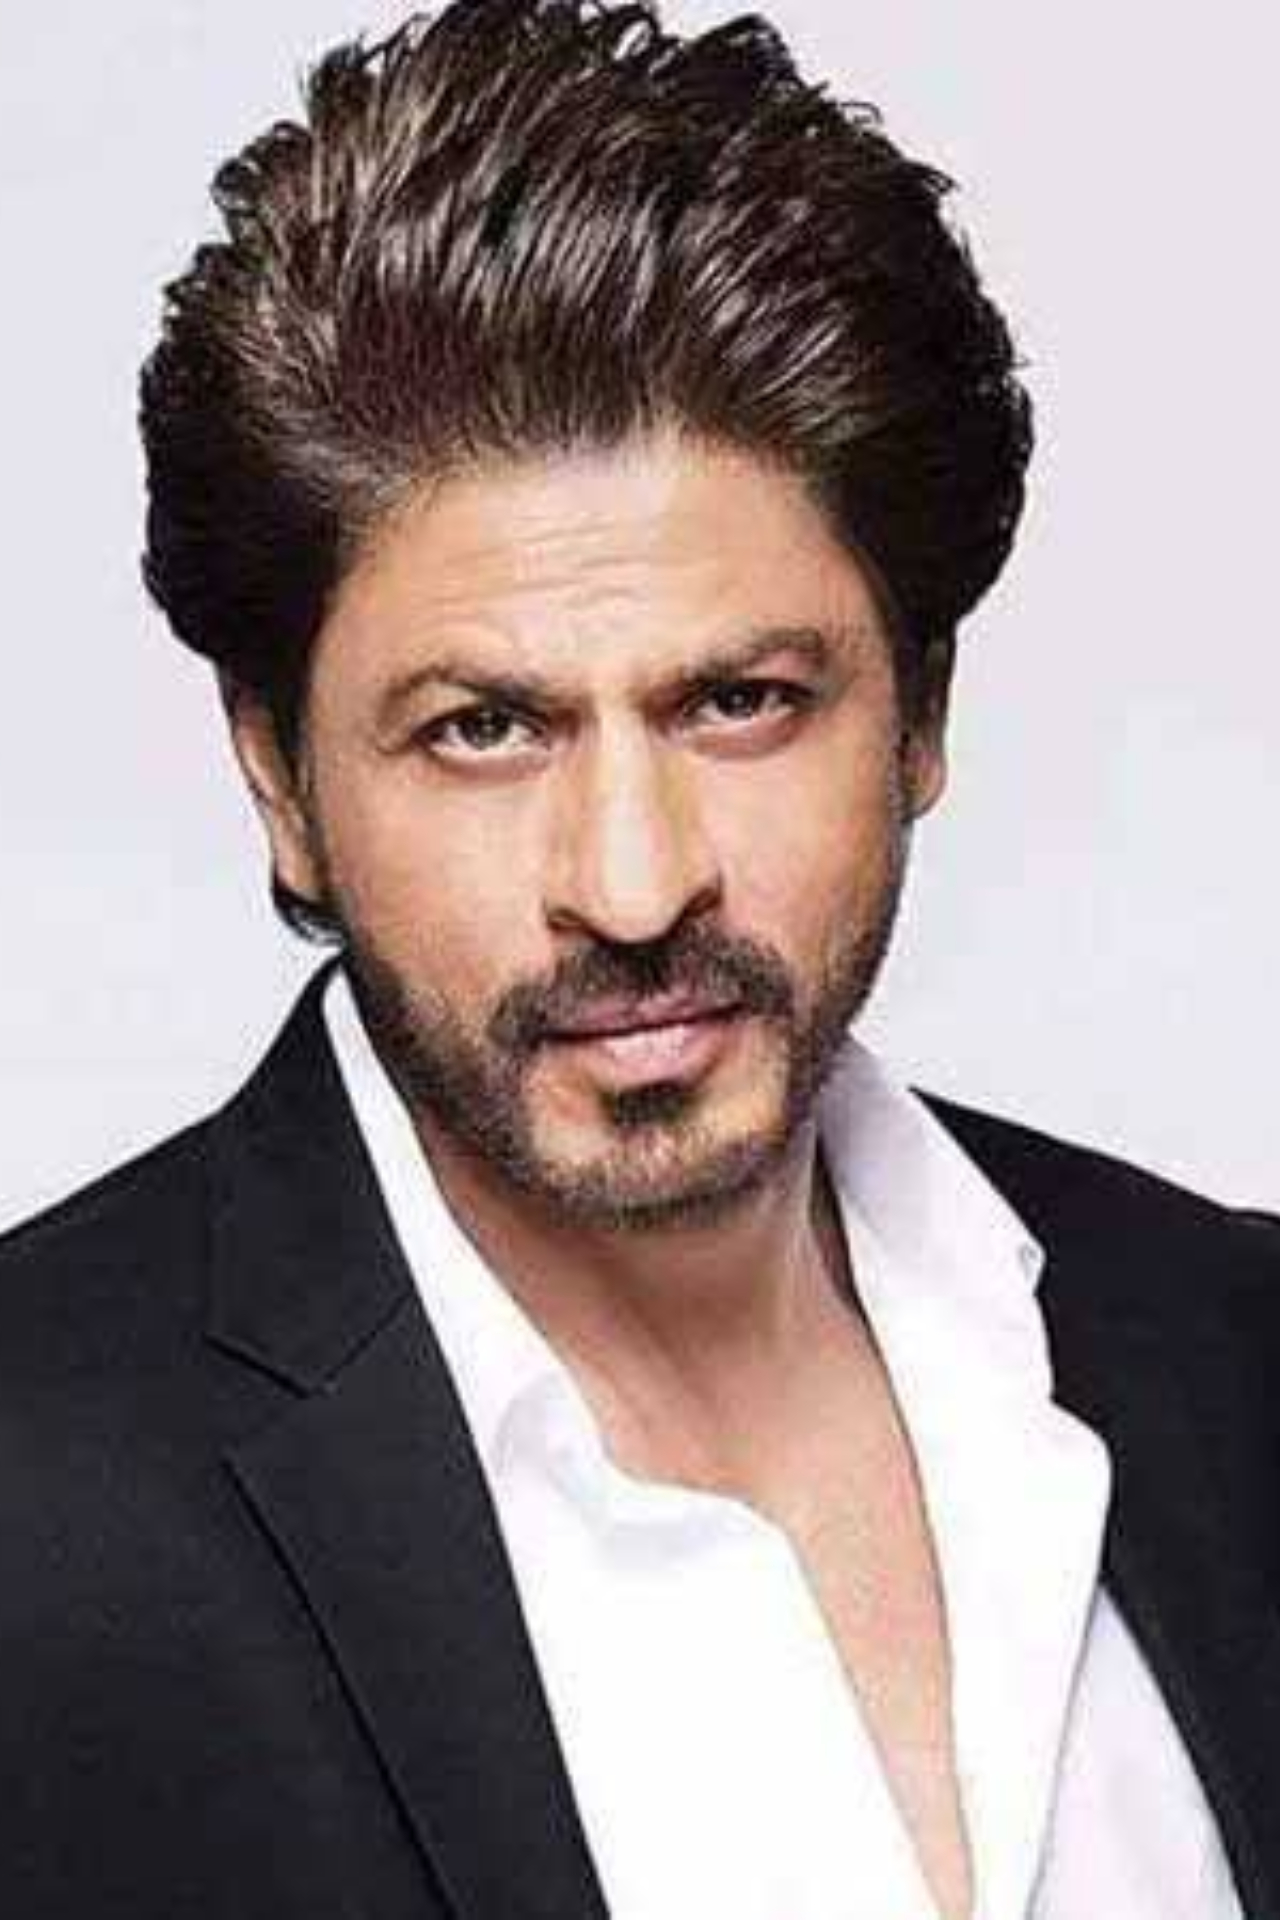 Shah Rukh Khan
Shah Rukh Khan shook the audiences as he announced 2 upcoming movies- Dunki and Jawaan along with the first look of Pathaan.